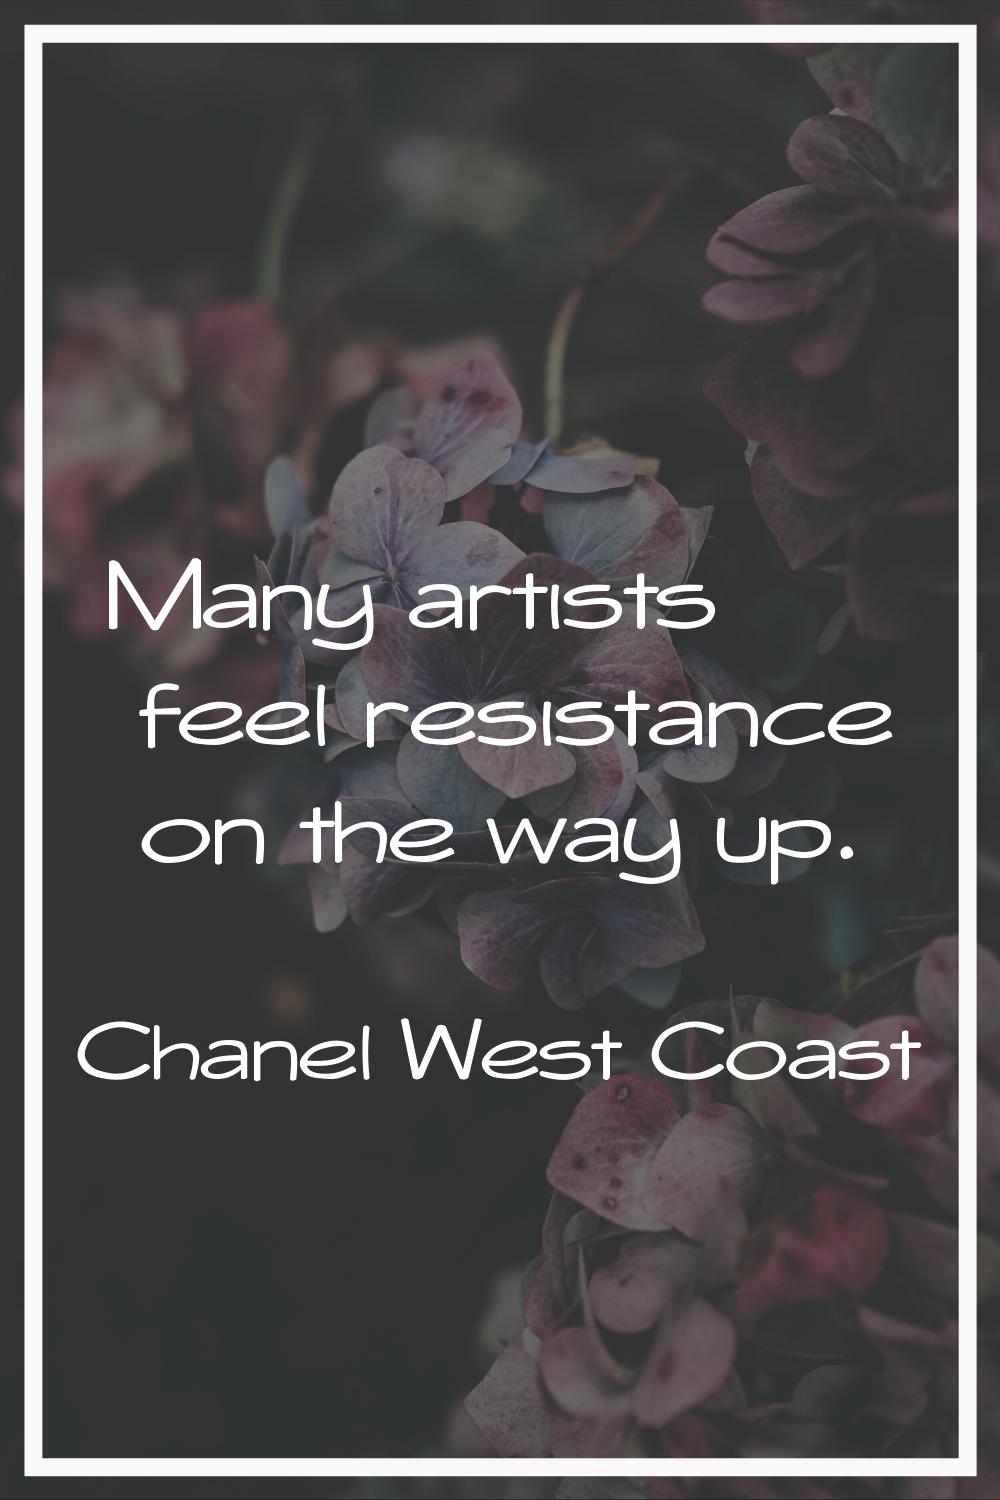 Many artists feel resistance on the way up.